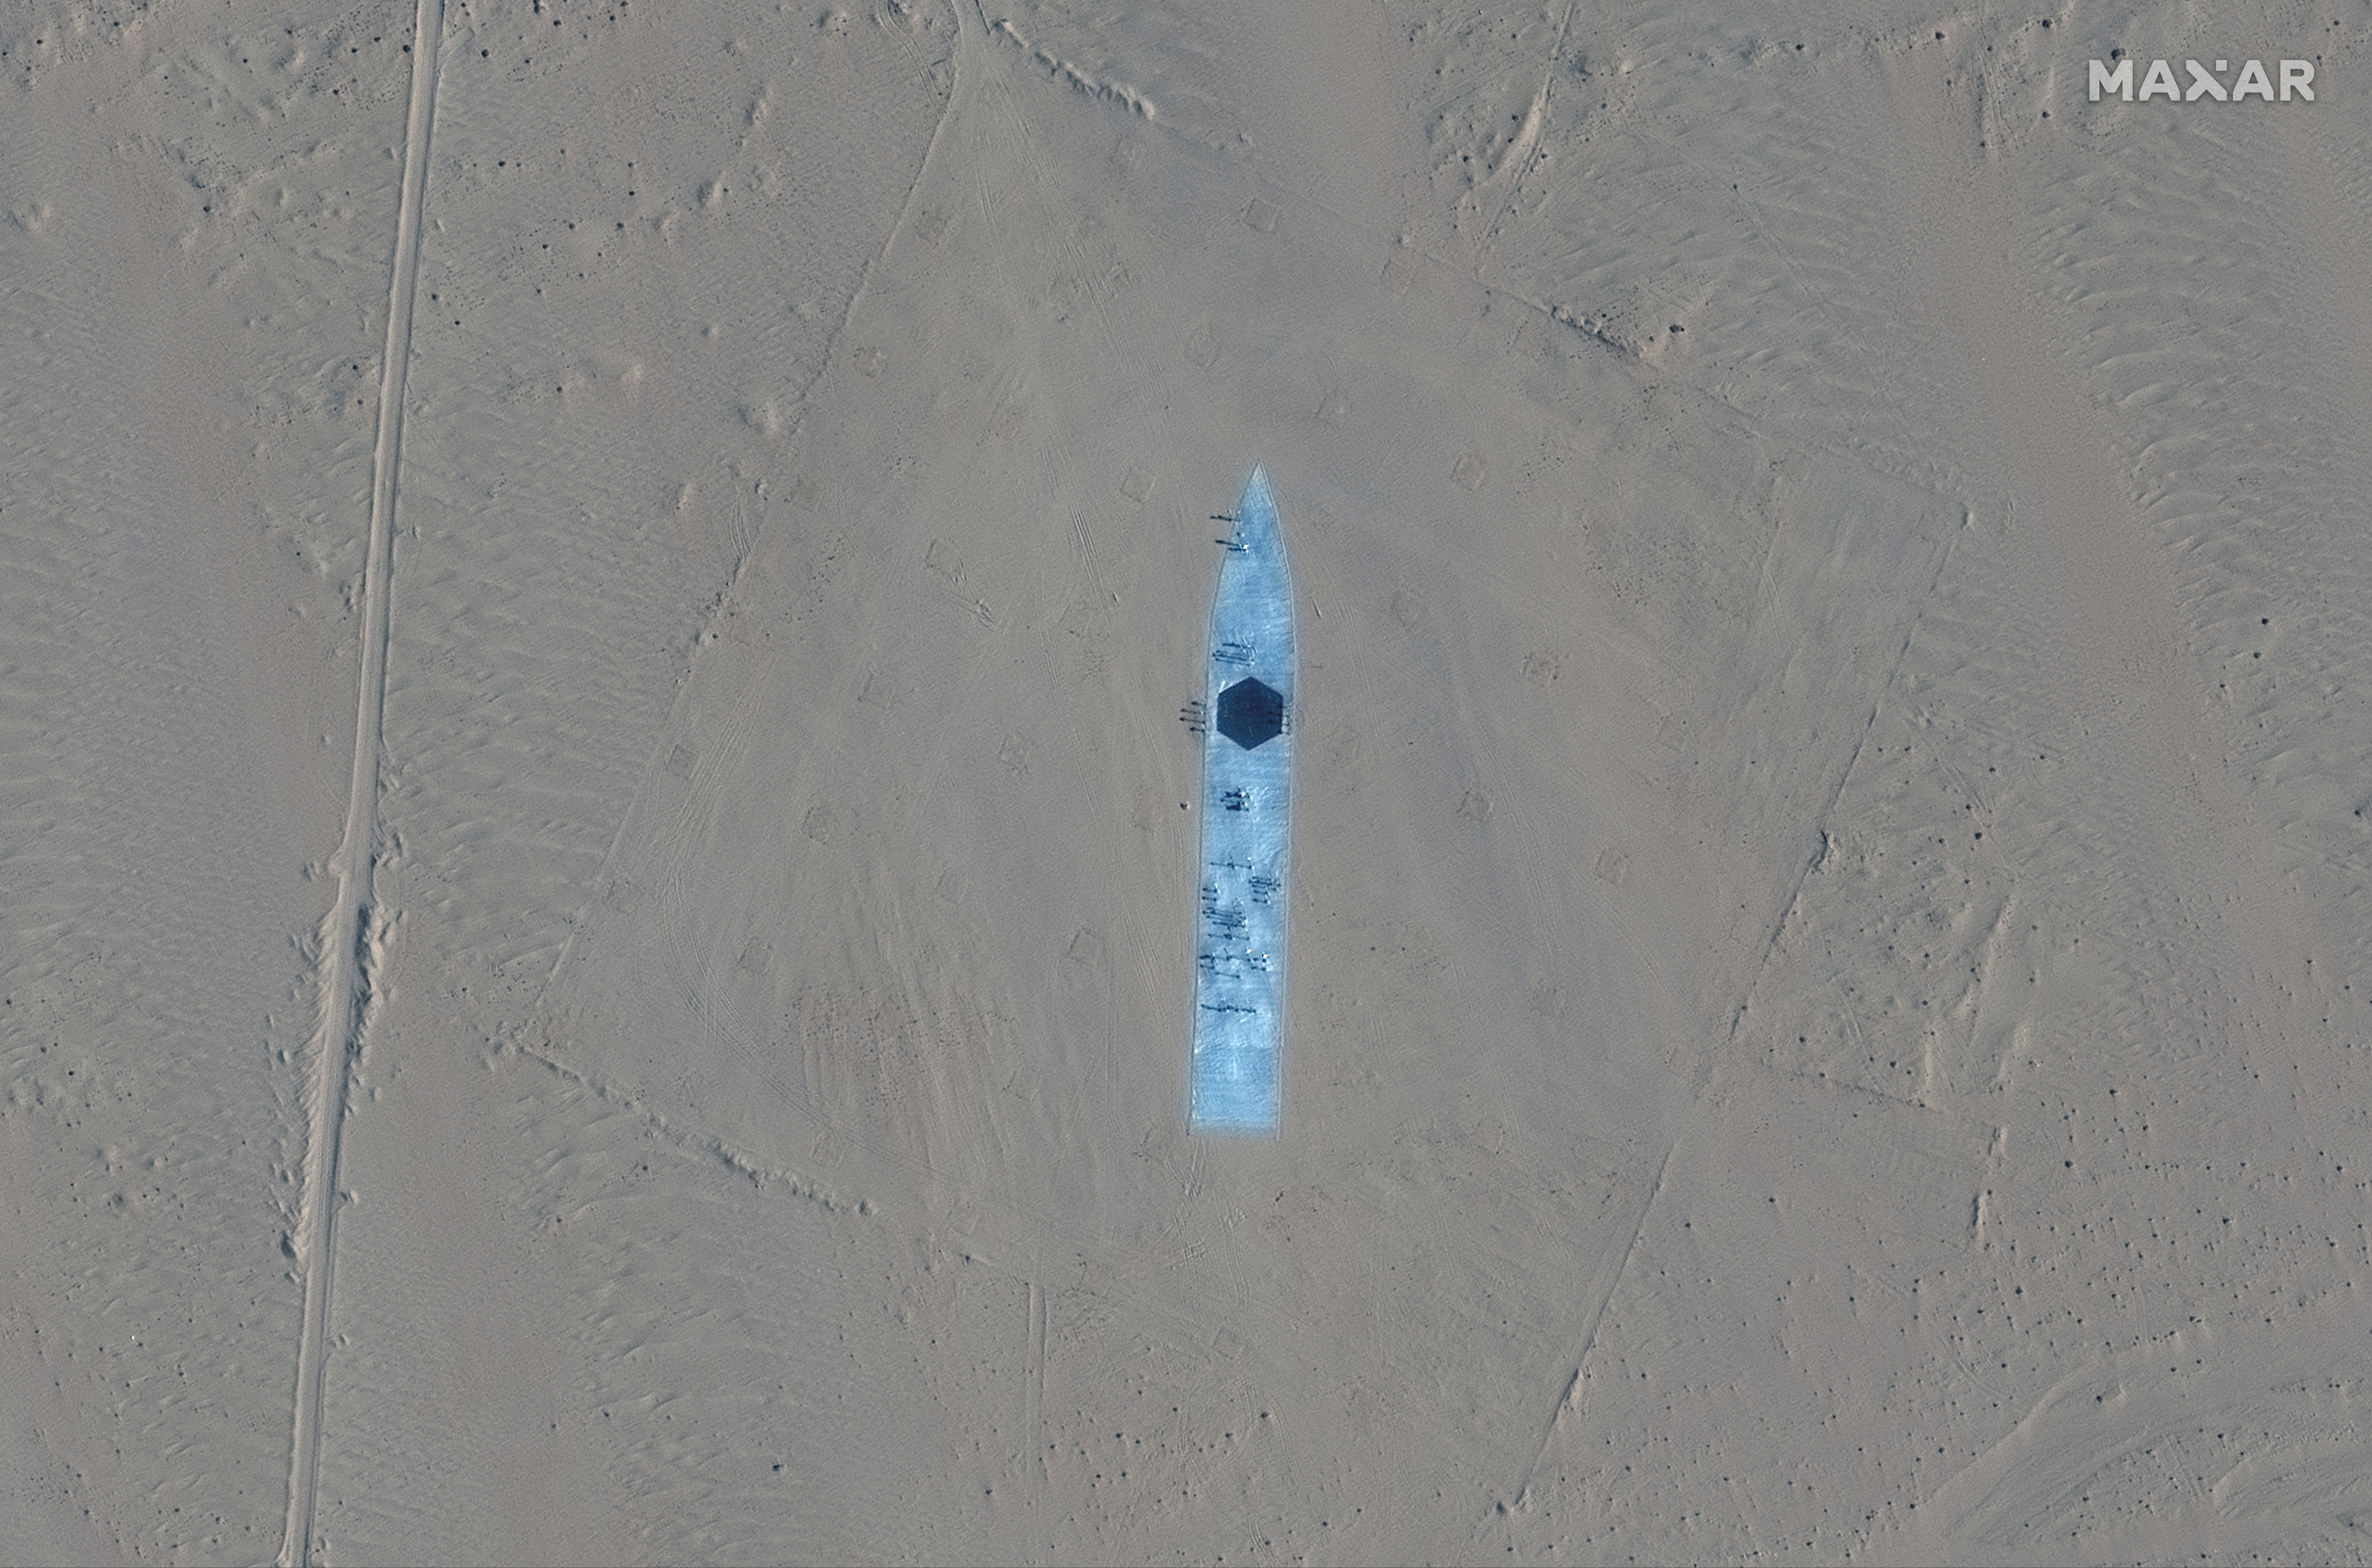 A satellite picture shows a destroyer target in Ruoqiang, Xinjiang, China, October 20, 2021. Satellite Image ©2021 Maxar Technologies/Handout via REUTERS. 